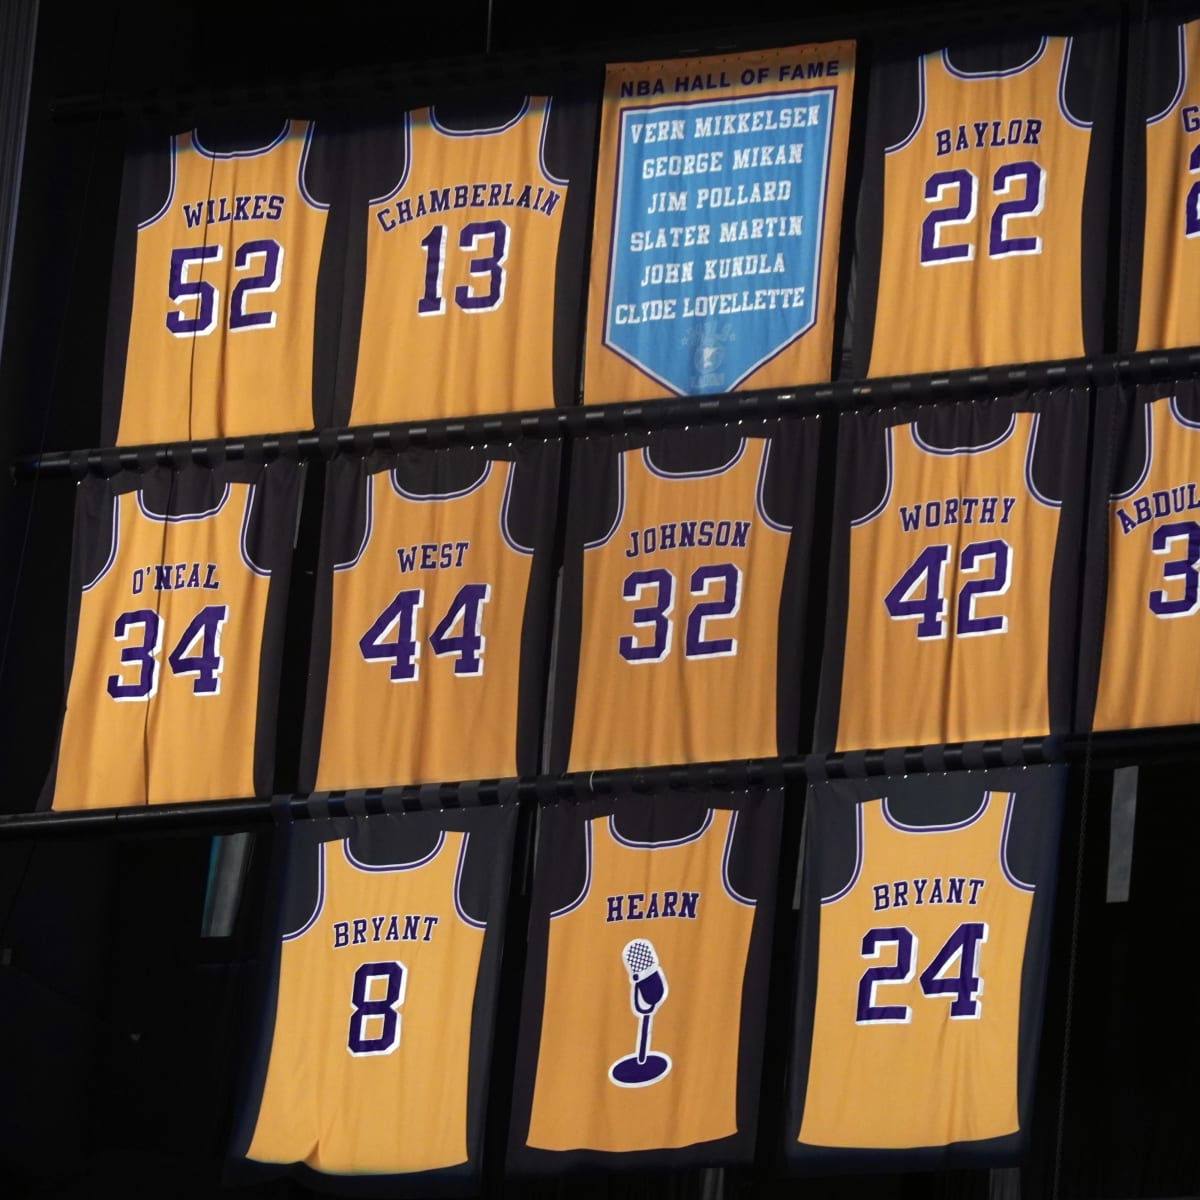 worthy lakers jersey